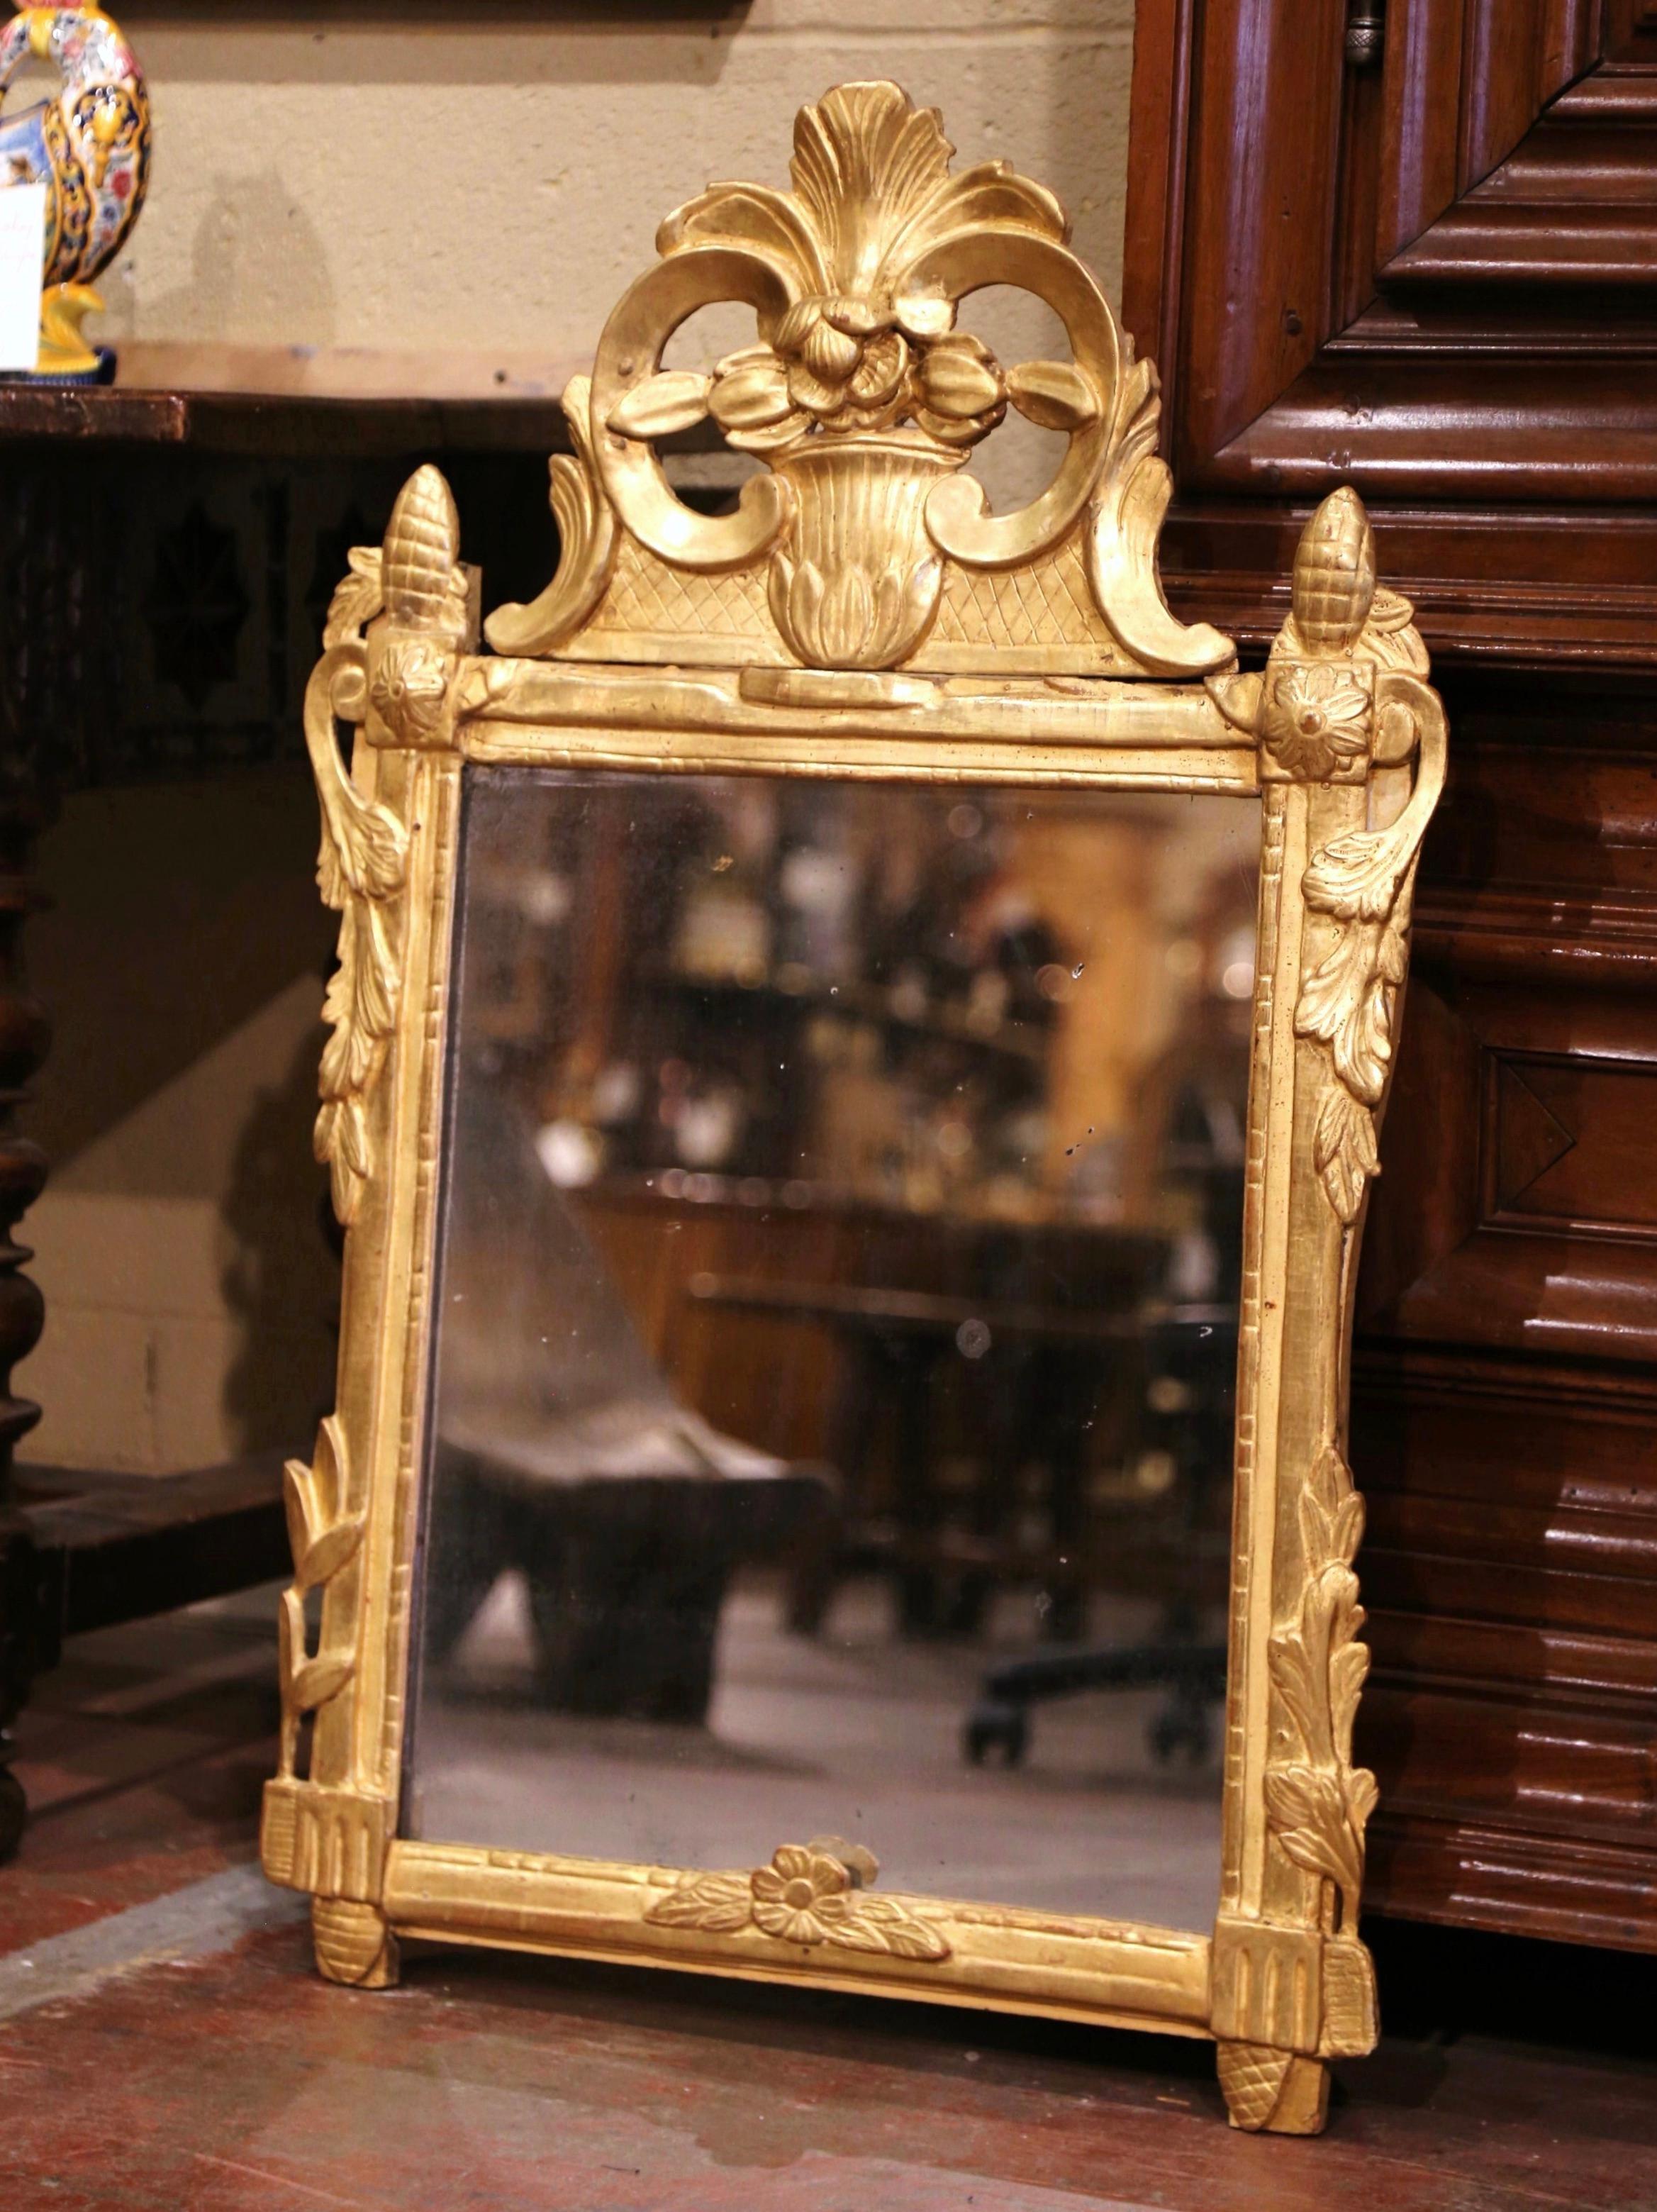 This elegant, antique gilt mirror would make a charming addition to an entryway or powder room. Crafted in Southern France, circa 1780, the rectangular Provincial mirror is heavily carved and exemplifies the design elements of the Rococo and Baroque